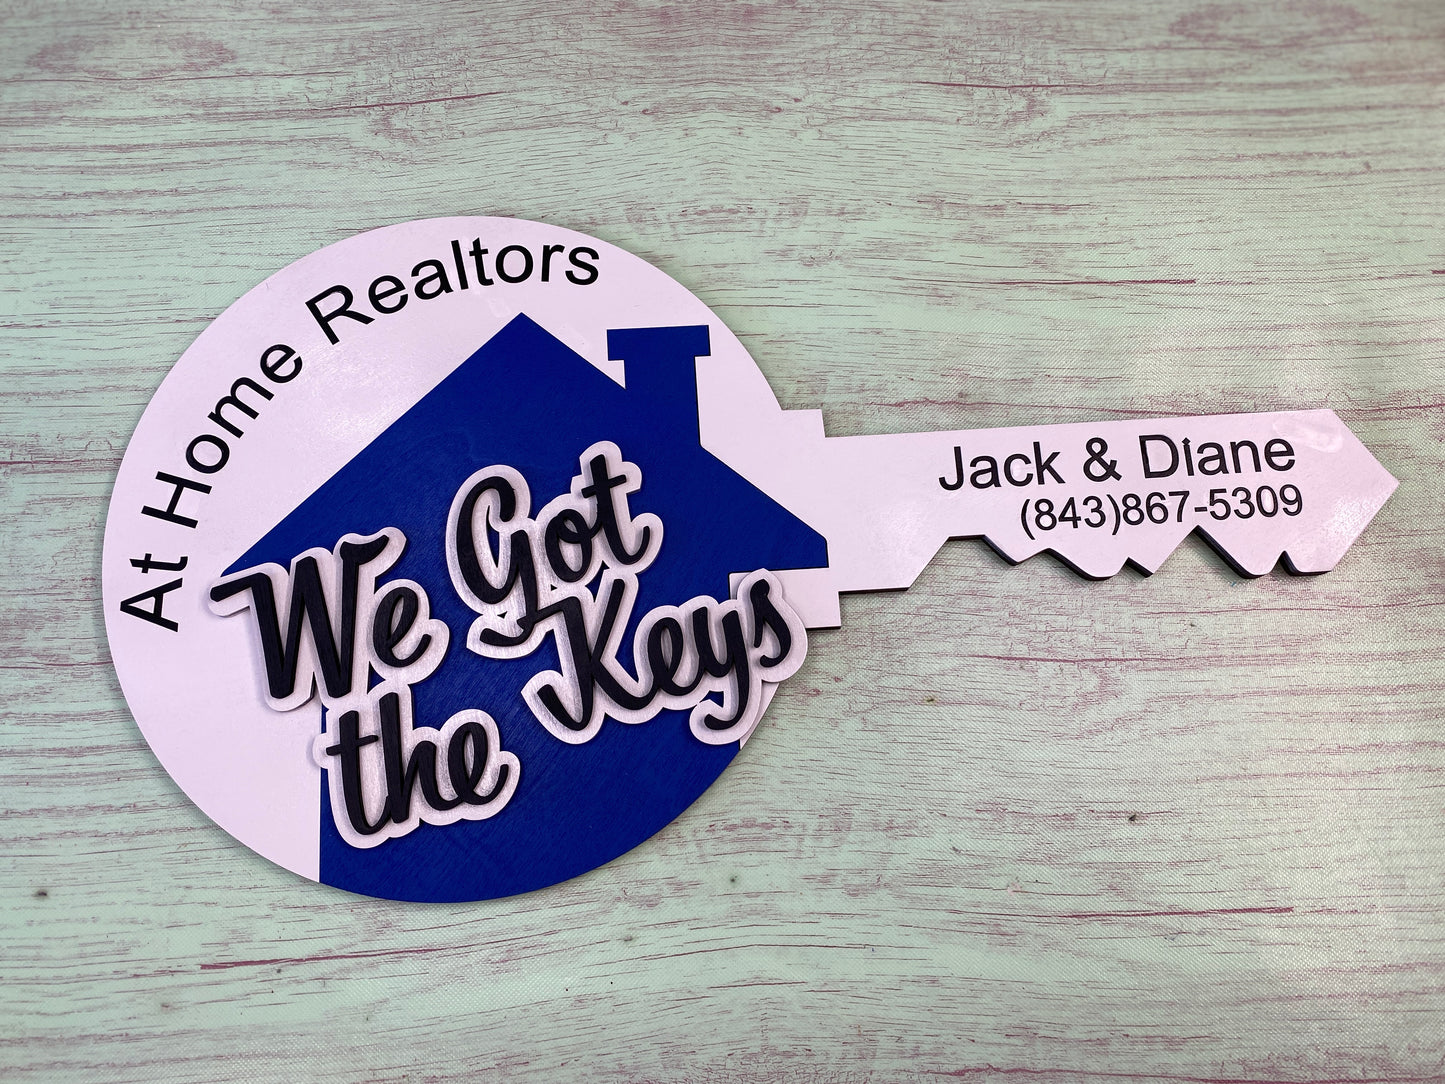 Realtor Key Photo Prop / Real Estate Professional Photo and Marketing Prop